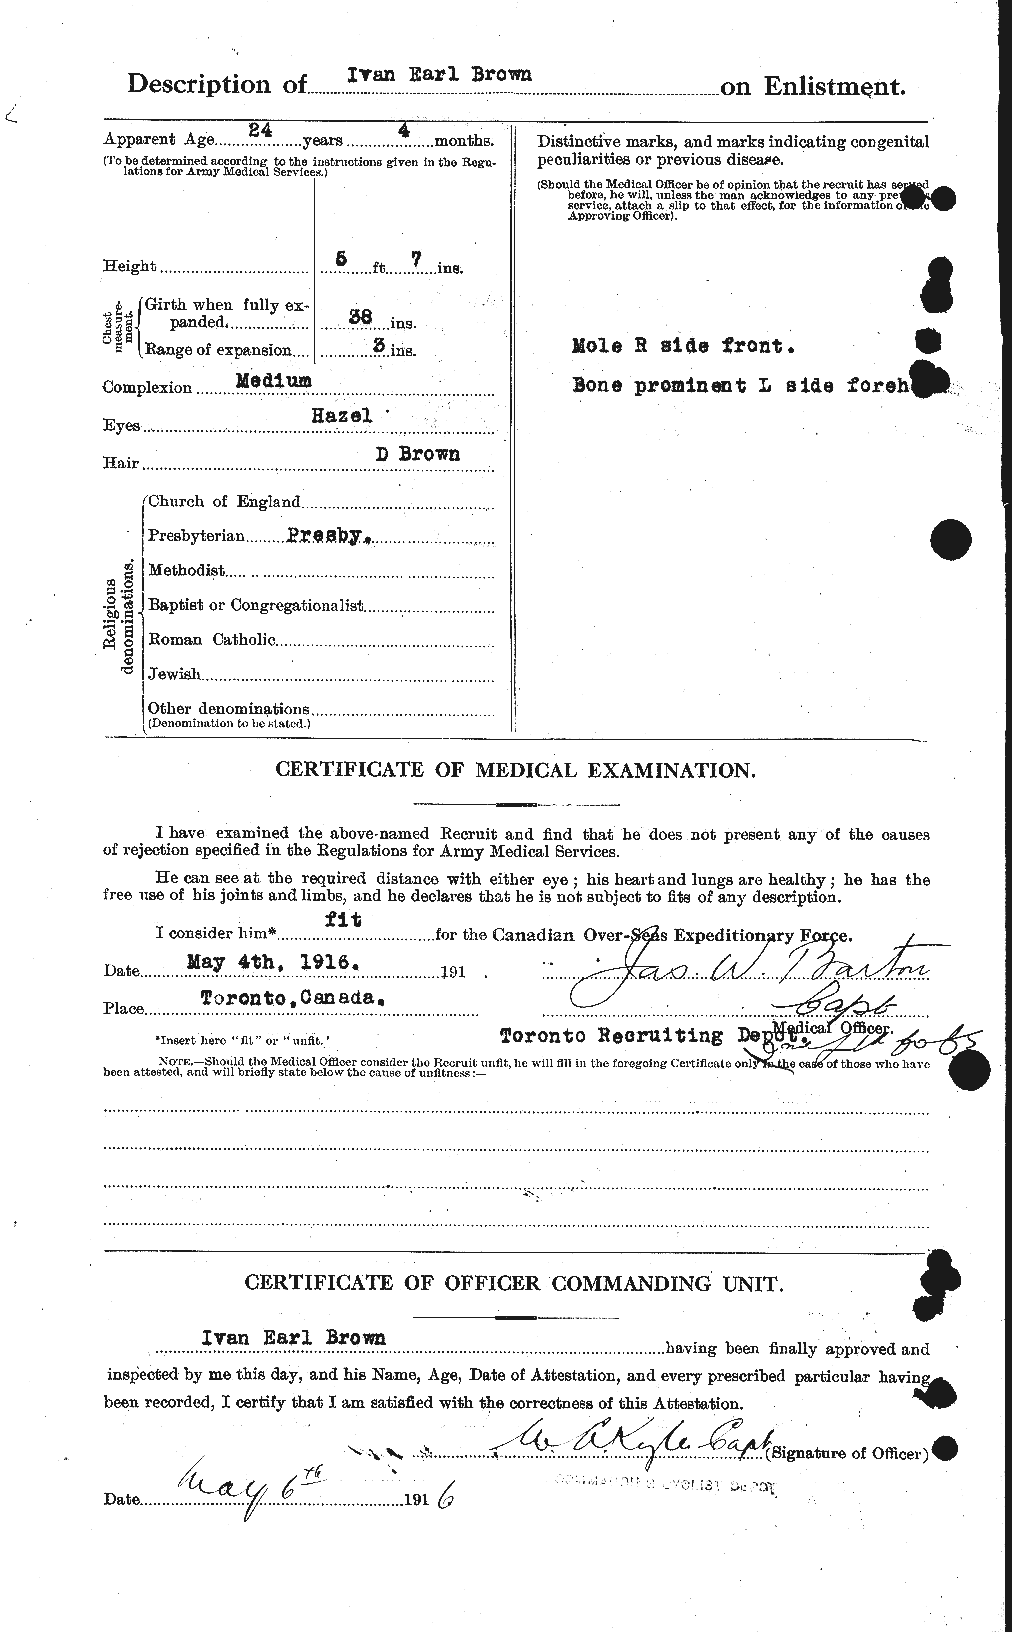 Personnel Records of the First World War - CEF 265670b